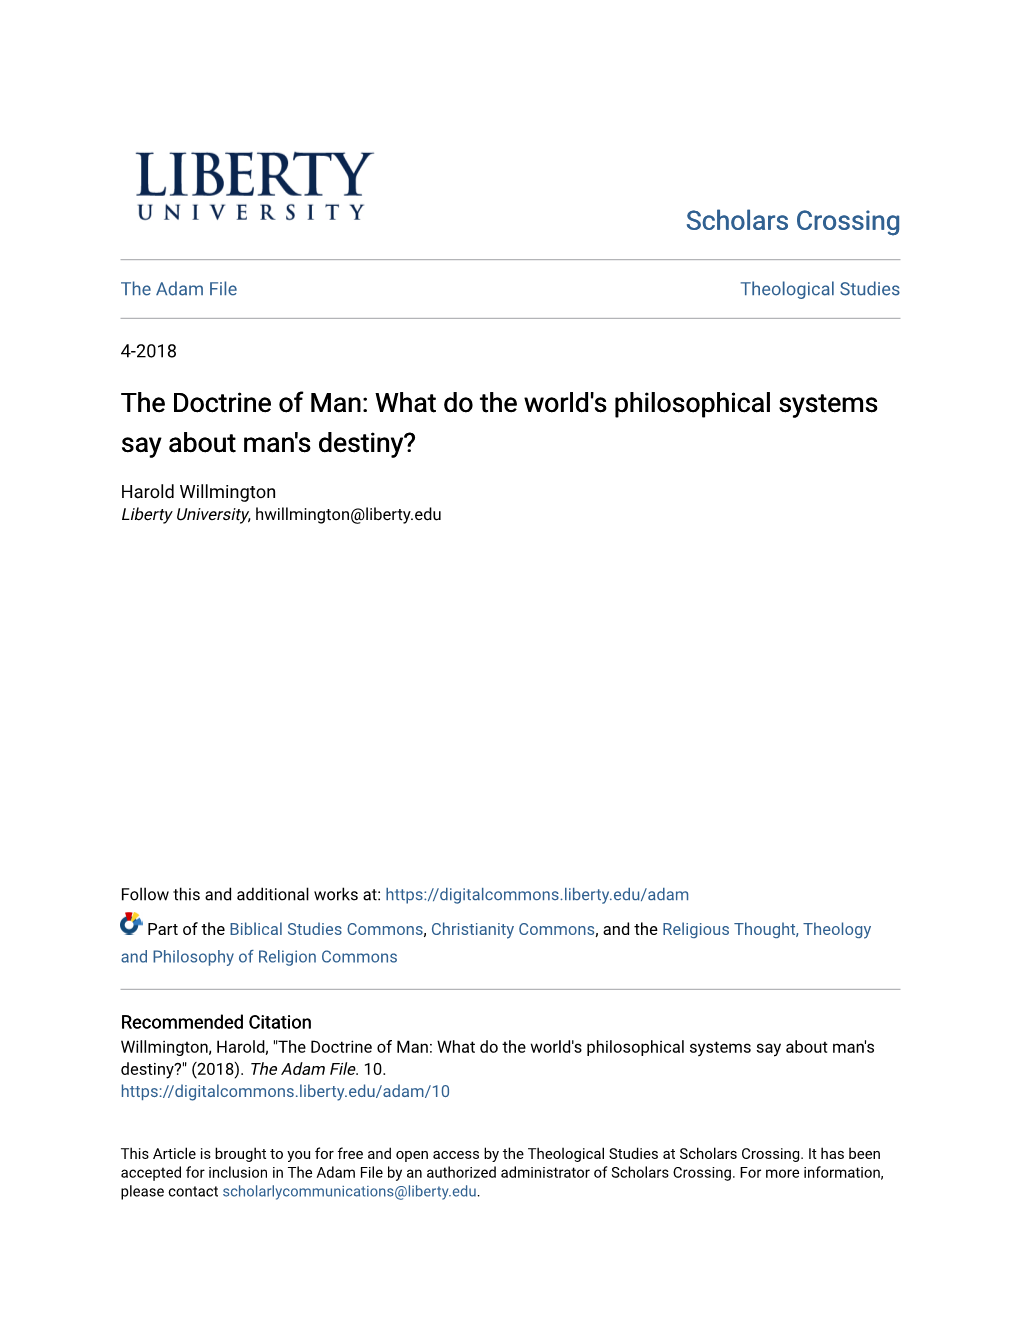 The Doctrine of Man: What Do the World's Philosophical Systems Say About Man's Destiny?